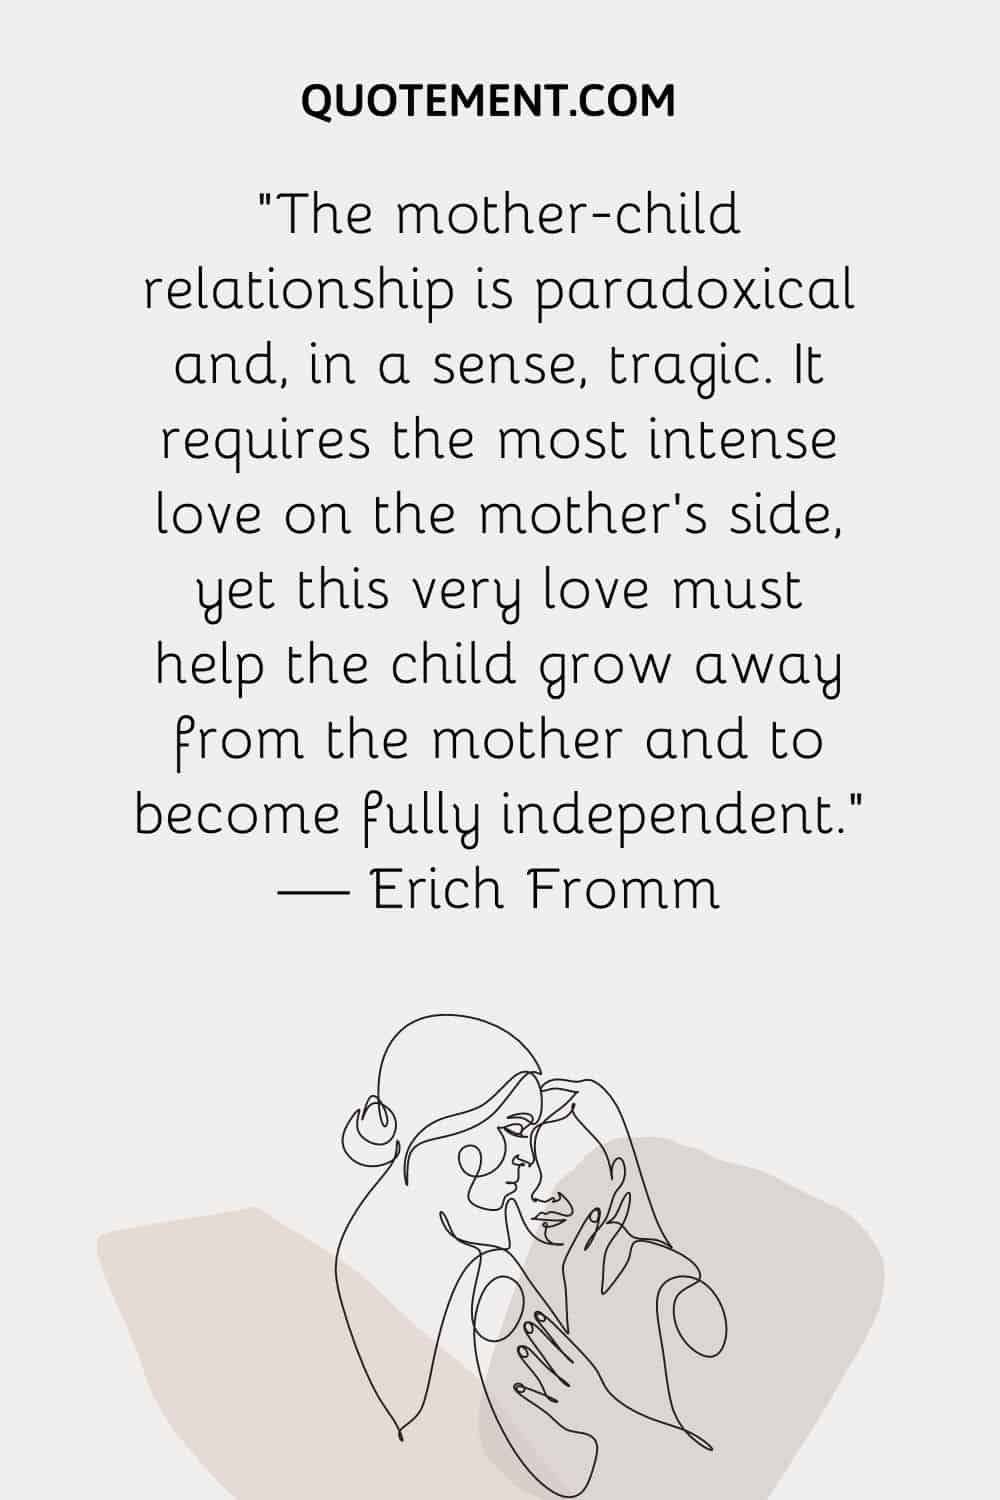 “The mother-child relationship is paradoxical and, in a sense, tragic. It requires the most intense love on the mother’s side,